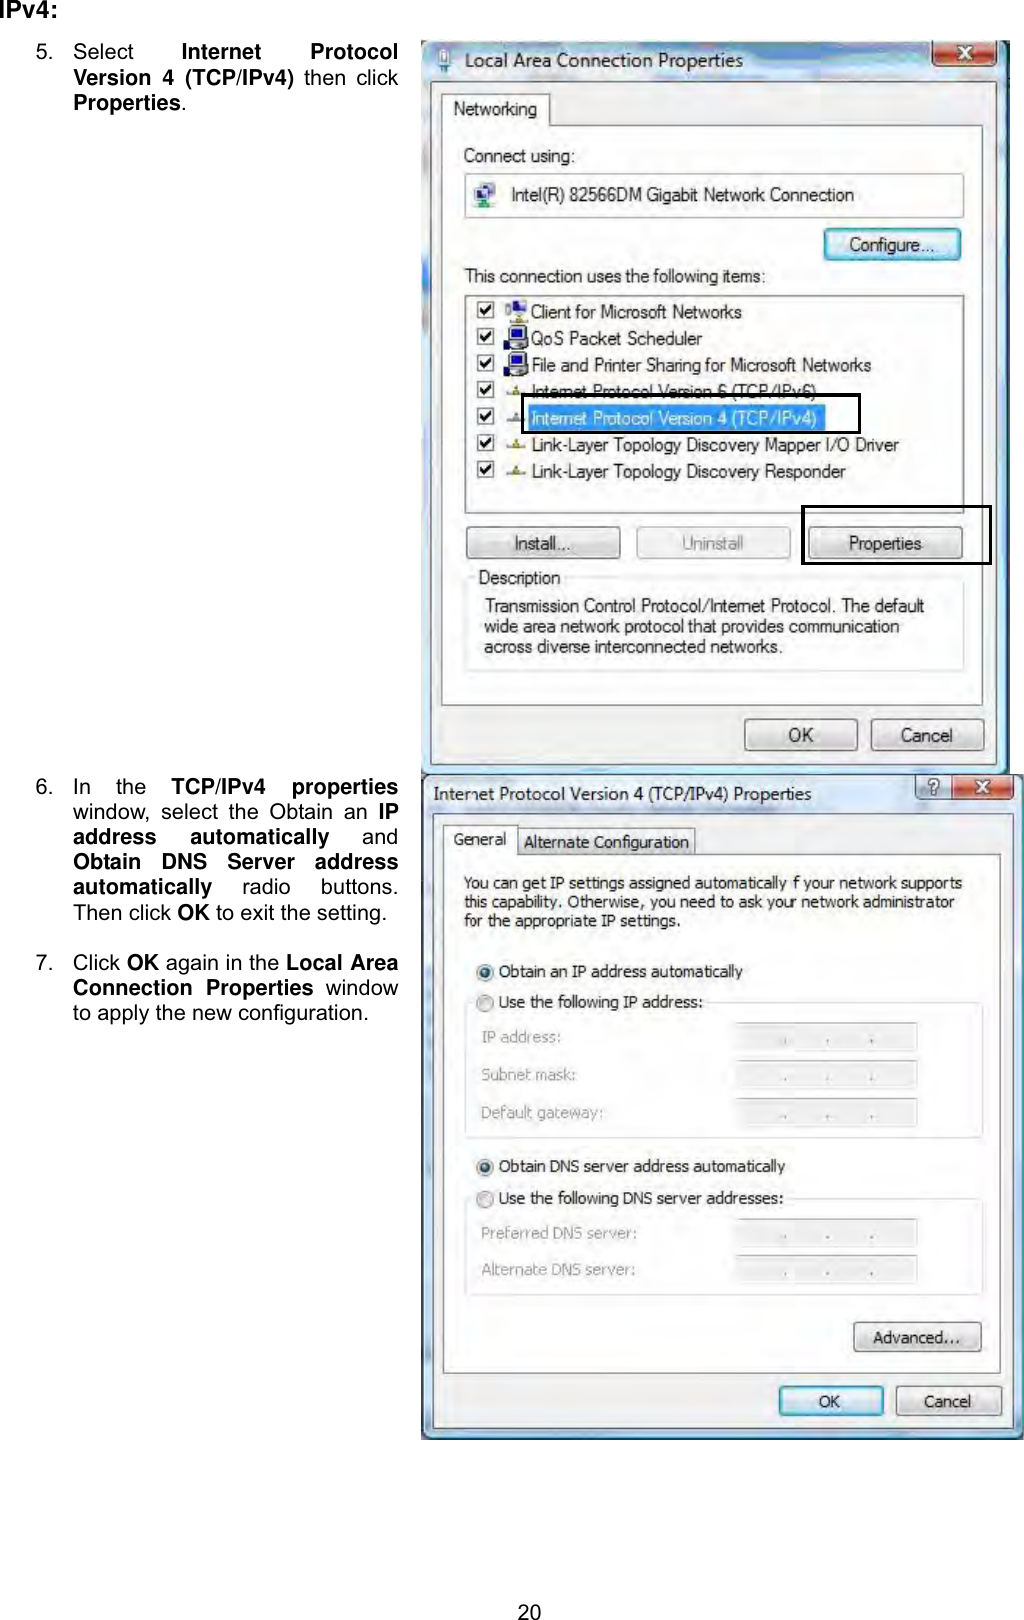 20IPv4:5. Select  Internet Protocol Version 4 (TCP/IPv4) then click Properties.6. In  the  TCP/IPv4 propertieswindow, select the Obtain an IP address automatically and Obtain DNS Server address automatically radio buttons. Then click OK to exit the setting. 7. Click OK again in the Local Area Connection Properties window to apply the new configuration. 